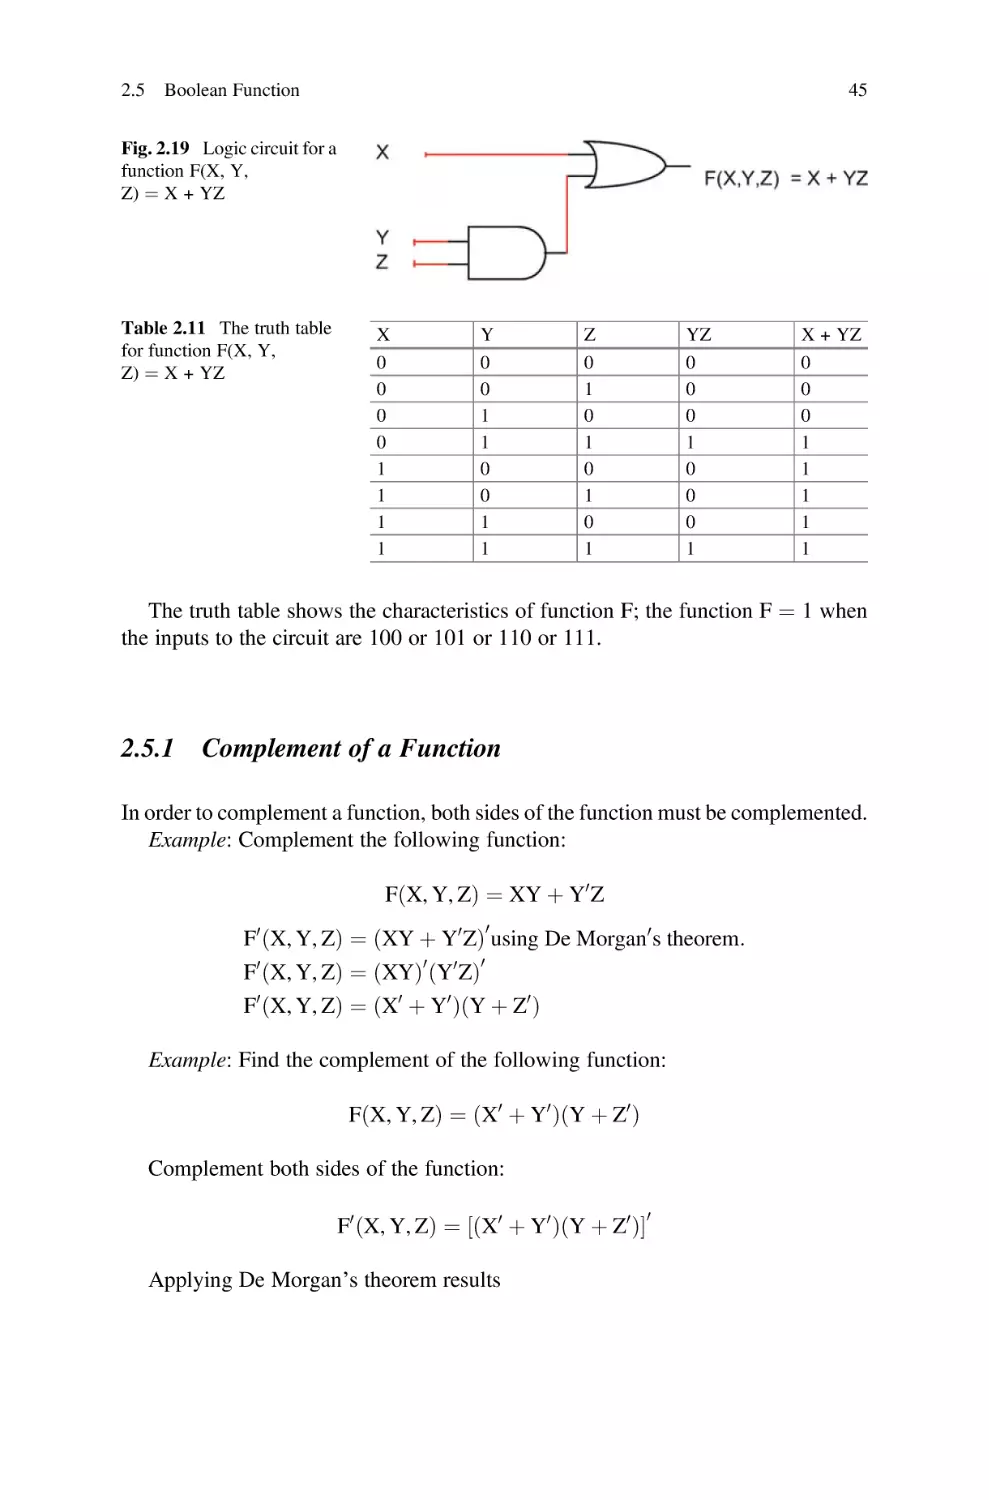 2.5.1 Complement of a Function